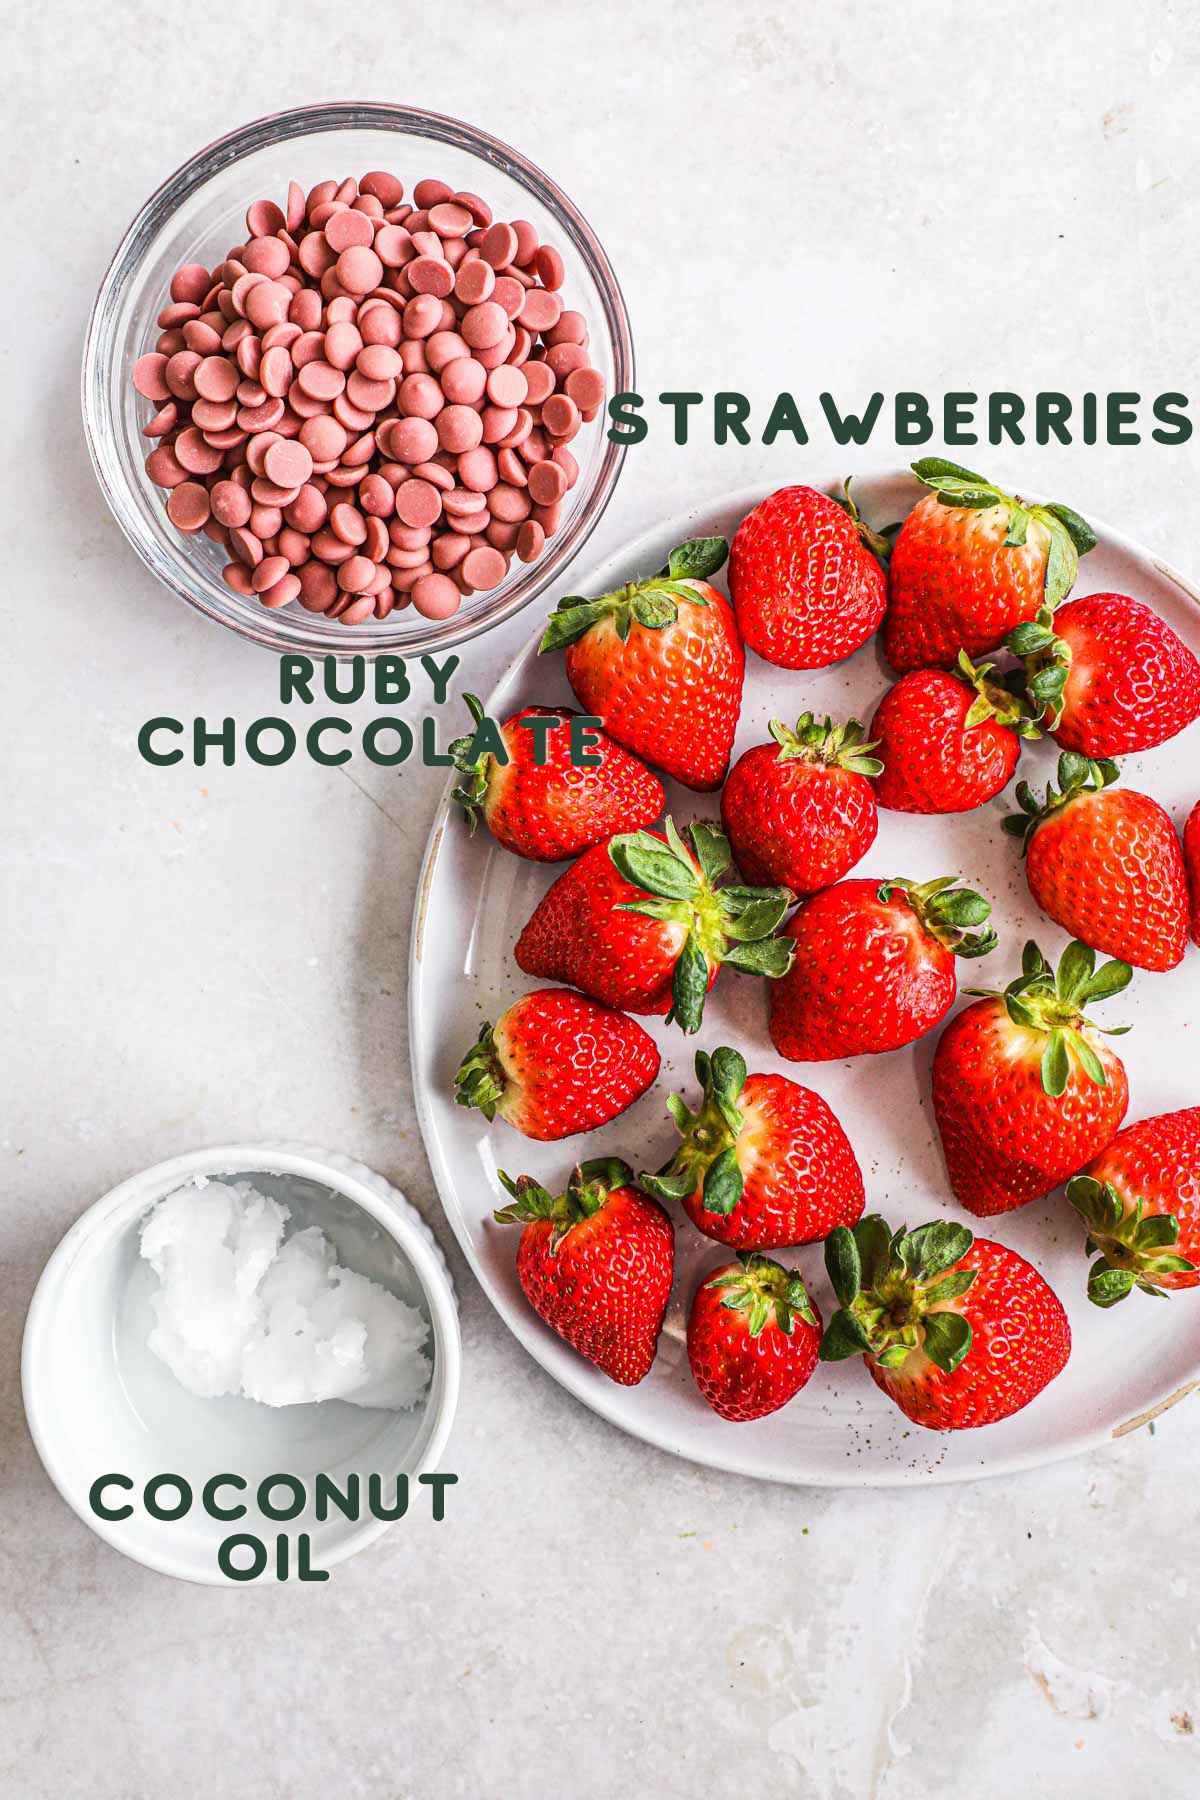 Ingredients to make pink ruby chocolate dipped strawberries, including strawberries, ruby chocolate, and coconut oil.